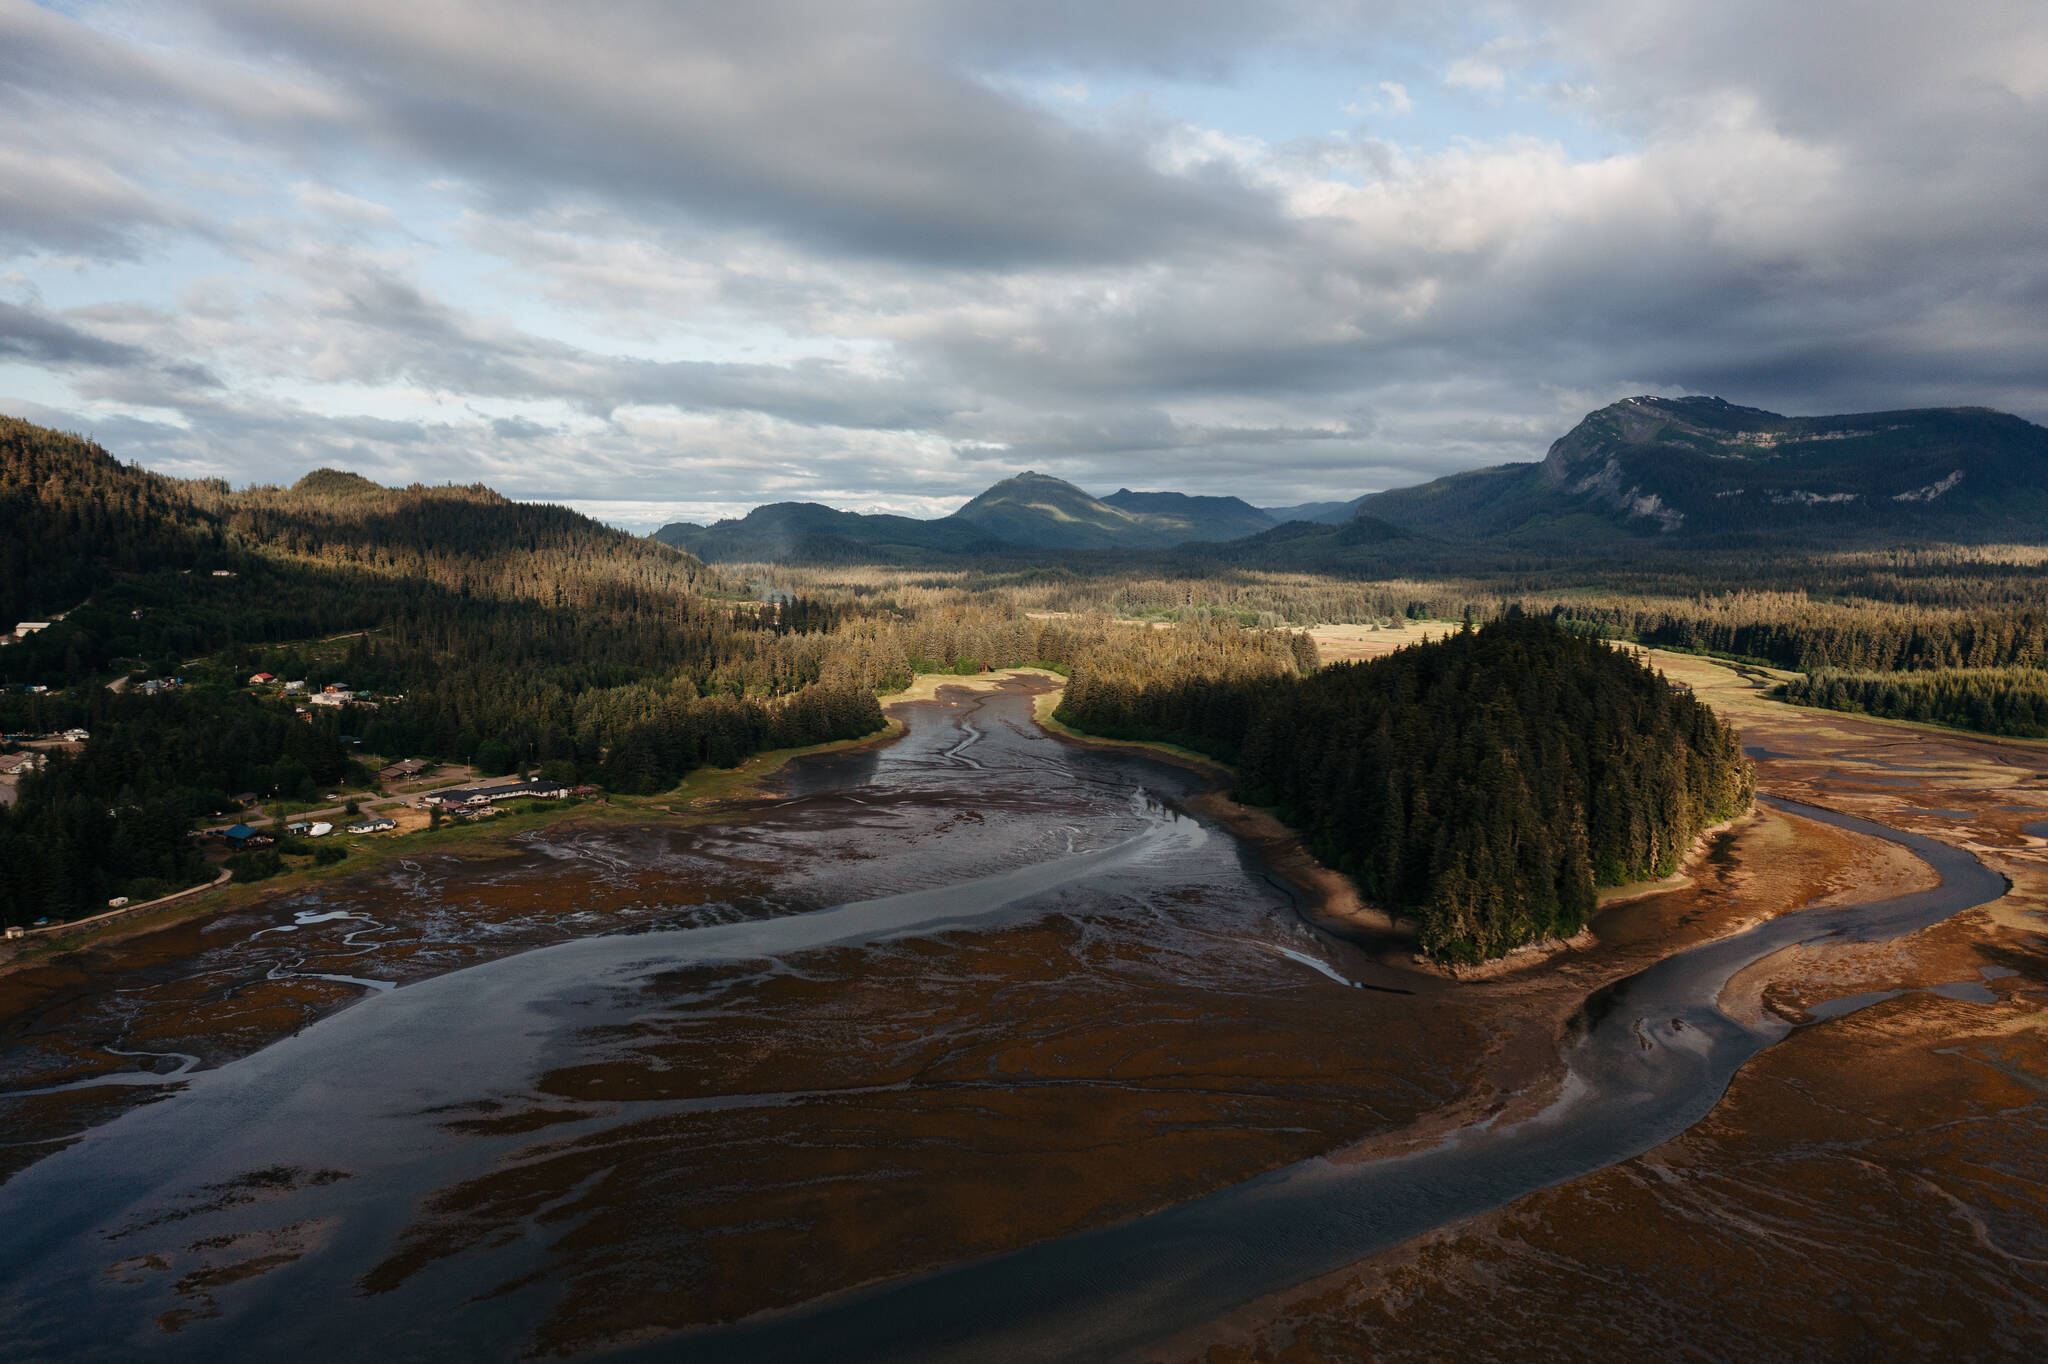 The community of Hoonah from above. Southeast Alaskans find strength and peace in the natural world that surrounds each remote community. (Courtesy Photo /Kerry Tasker for Visit Southeast)